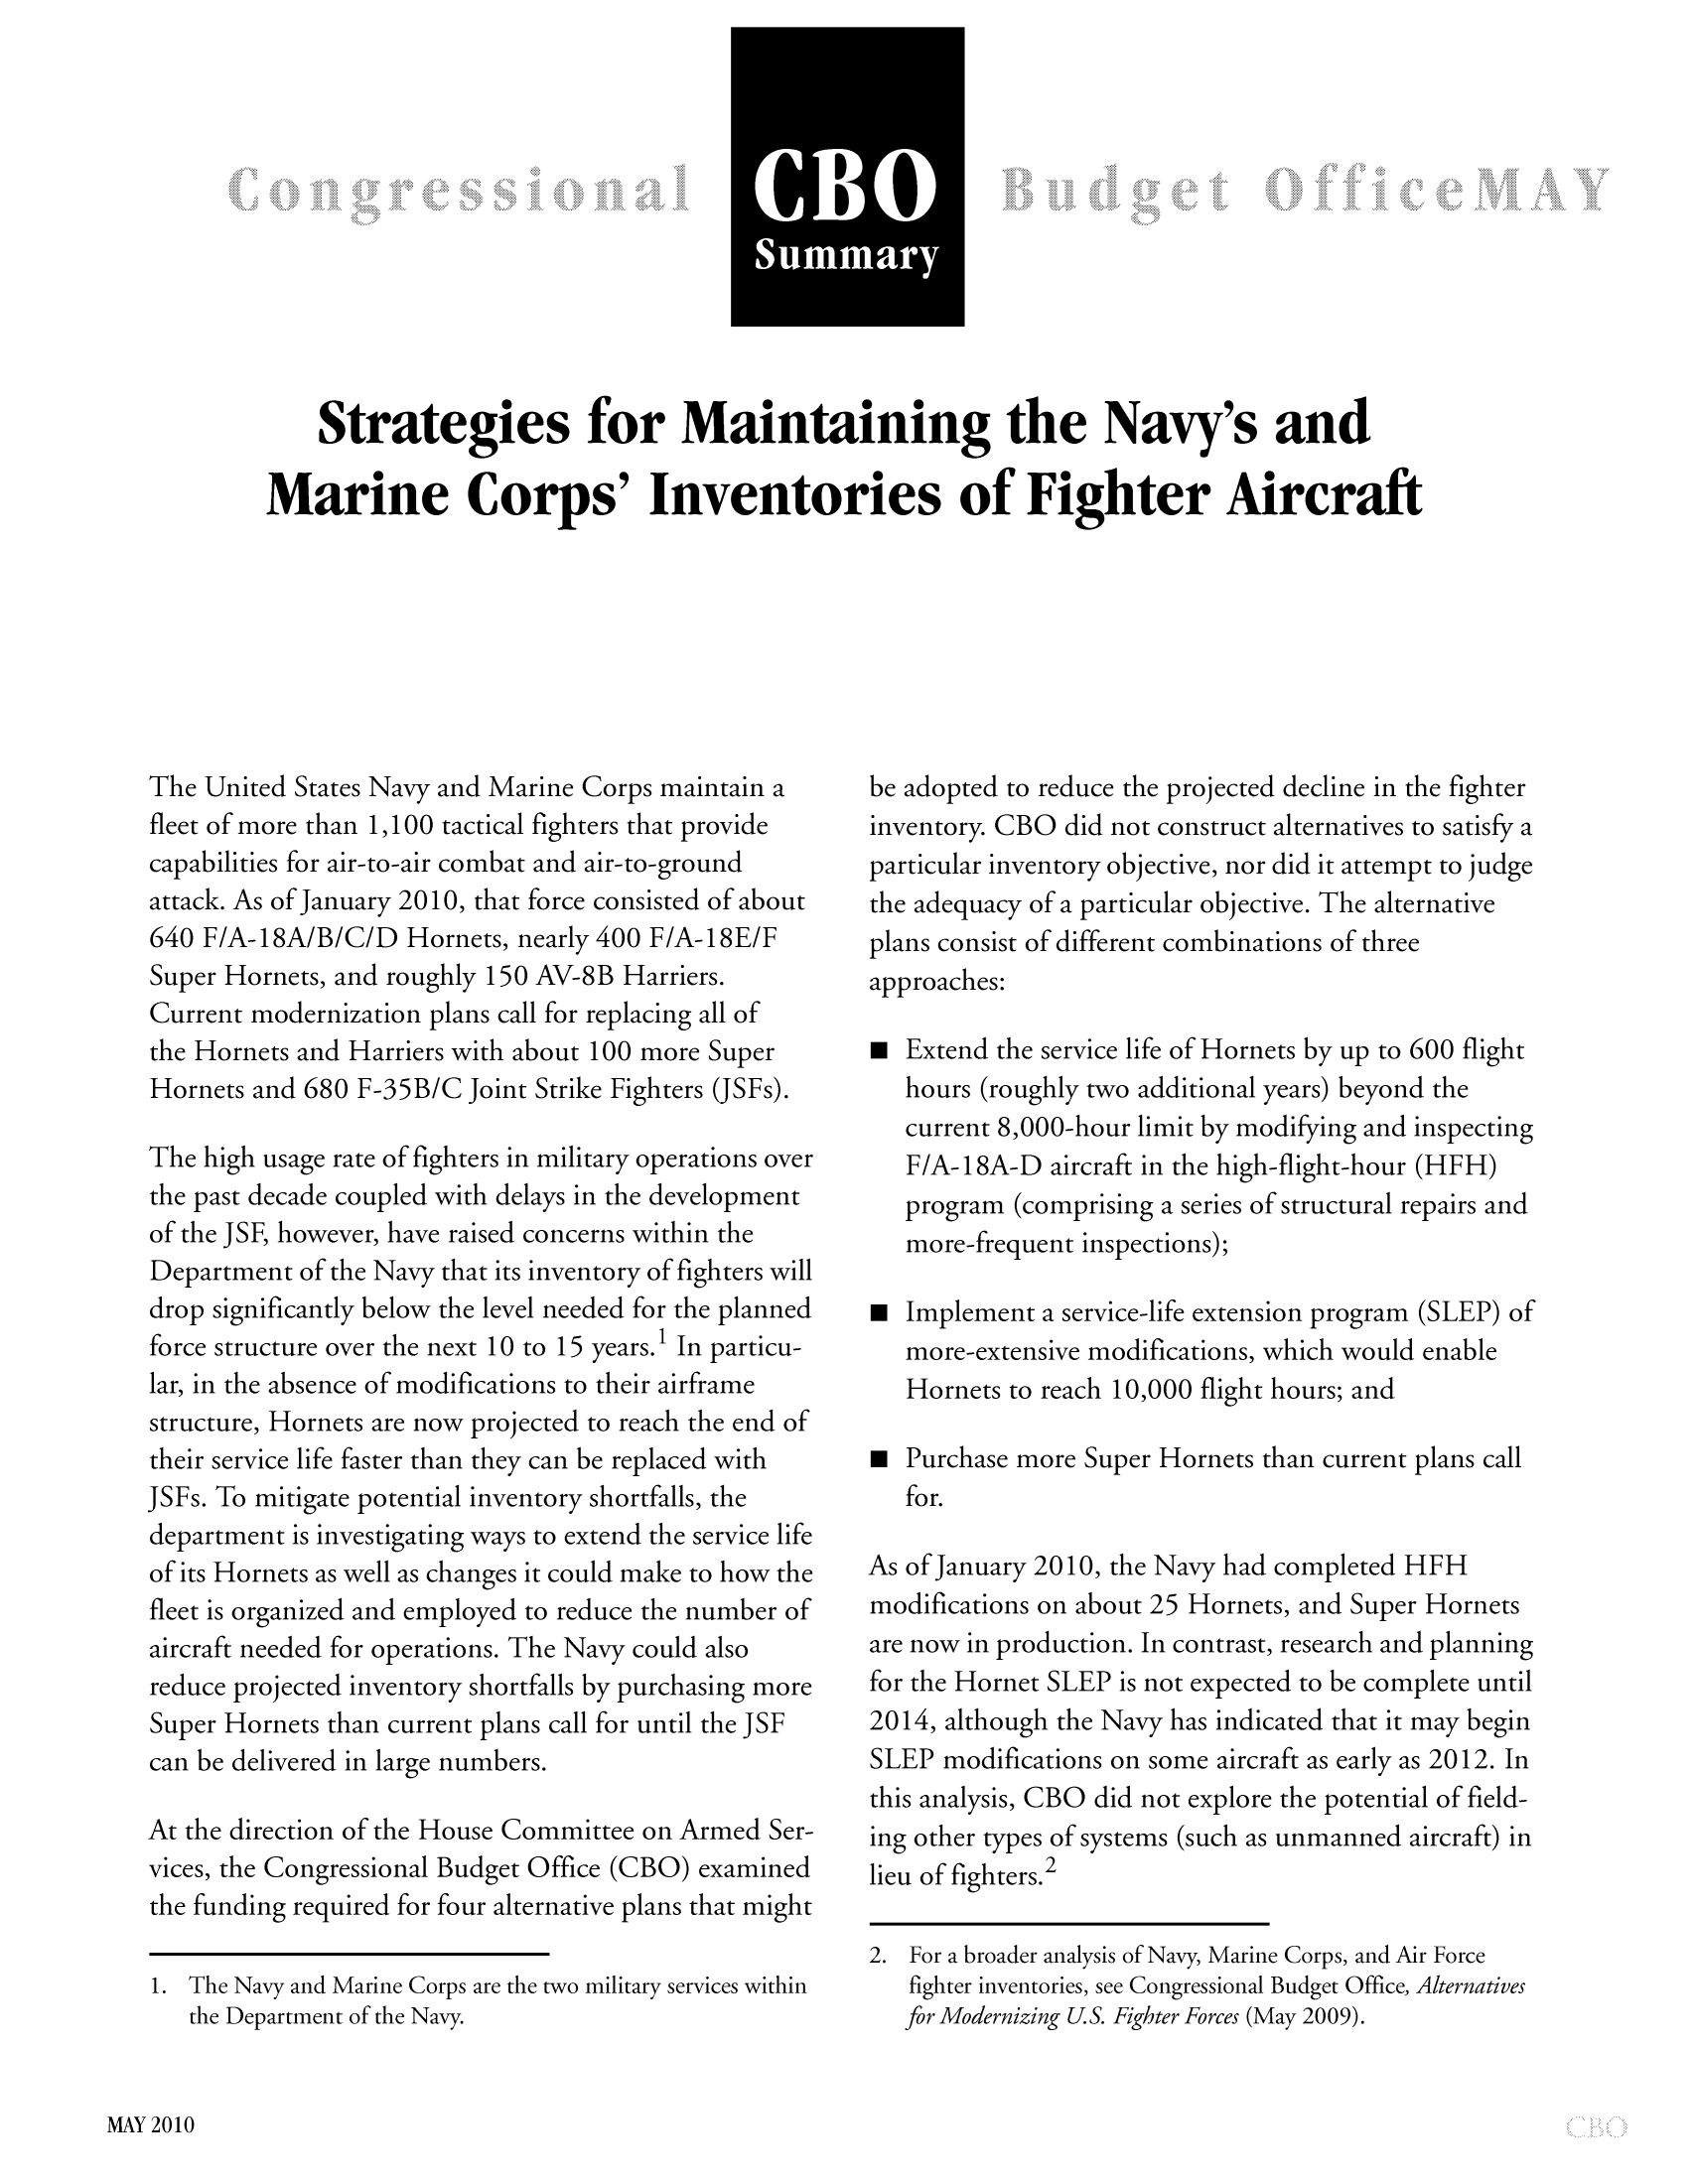 handle is hein.congrec/cbo10049 and id is 1 raw text is: CBO
Summary

Strategies for Maintaining the Navy's and
Marine Corps' Inventories of Fighter Aircraft

The United States Navy and Marine Corps maintain a
fleet of more than 1,100 tactical fighters that provide
capabilities for air-to-air combat and air-to-ground
attack. As of January 2010, that force consisted of about
640 F/A-18A/B/C/D Hornets, nearly 400 F/A-18E/F
Super Hornets, and roughly 150 AV-8B Harriers.
Current modernization plans call for replacing all of
the Hornets and Harriers with about 100 more Super
Hornets and 680 F-35B/C Joint Strike Fighters (JSFs).
The high usage rate of fighters in military operations over
the past decade coupled with delays in the development
of the JSF, however, have raised concerns within the
Department of the Navy that its inventory of fighters will
drop significantly below the level needed for the planned
force structure over the next 10 to 15 years.1 In particu-
lar, in the absence of modifications to their airframe
structure, Hornets are now projected to reach the end of
their service life faster than they can be replaced with
JSFs. To mitigate potential inventory shortfalls, the
department is investigating ways to extend the service life
of its Hornets as well as changes it could make to how the
fleet is organized and employed to reduce the number of
aircraft needed for operations. The Navy could also
reduce projected inventory shortfalls by purchasing more
Super Hornets than current plans call for until the JSF
can be delivered in large numbers.
At the direction of the House Committee on Armed Ser-
vices, the Congressional Budget Office (CBO) examined
the funding required for four alternative plans that might
1. The Navy and Marine Corps are the two military services within
the Department of the Navy.

be adopted to reduce the projected decline in the fighter
inventory. CBO did not construct alternatives to satisfy a
particular inventory objective, nor did it attempt to judge
the adequacy of a particular objective. The alternative
plans consist of different combinations of three
approaches:
 Extend the service life of Hornets by up to 600 flight
hours (roughly two additional years) beyond the
current 8,000-hour limit by modifying and inspecting
F/A-I 8A-D aircraft in the high-flight-hour (HFH)
program (comprising a series of structural repairs and
more-frequent inspections);
 Implement a service-life extension program (SLEP) of
more-extensive modifications, which would enable
Hornets to reach 10,000 flight hours; and
 Purchase more Super Hornets than current plans call
for.
As of January 2010, the Navy had completed HFH
modifications on about 25 Hornets, and Super Hornets
are now in production. In contrast, research and planning
for the Hornet SLEP is not expected to be complete until
2014, although the Navy has indicated that it may begin
SLEP modifications on some aircraft as early as 2012. In
this analysis, CBO did not explore the potential of field-
ing other types of systems (such as unmanned aircraft) in
lieu of fighters.2
2. For a broader analysis of Navy, Marine Corps, and Air Force
fighter inventories, see Congressional Budget Office, Alternatives
for Modernizing U.S. Fighter Forces (May 2009).

MAY 2010


